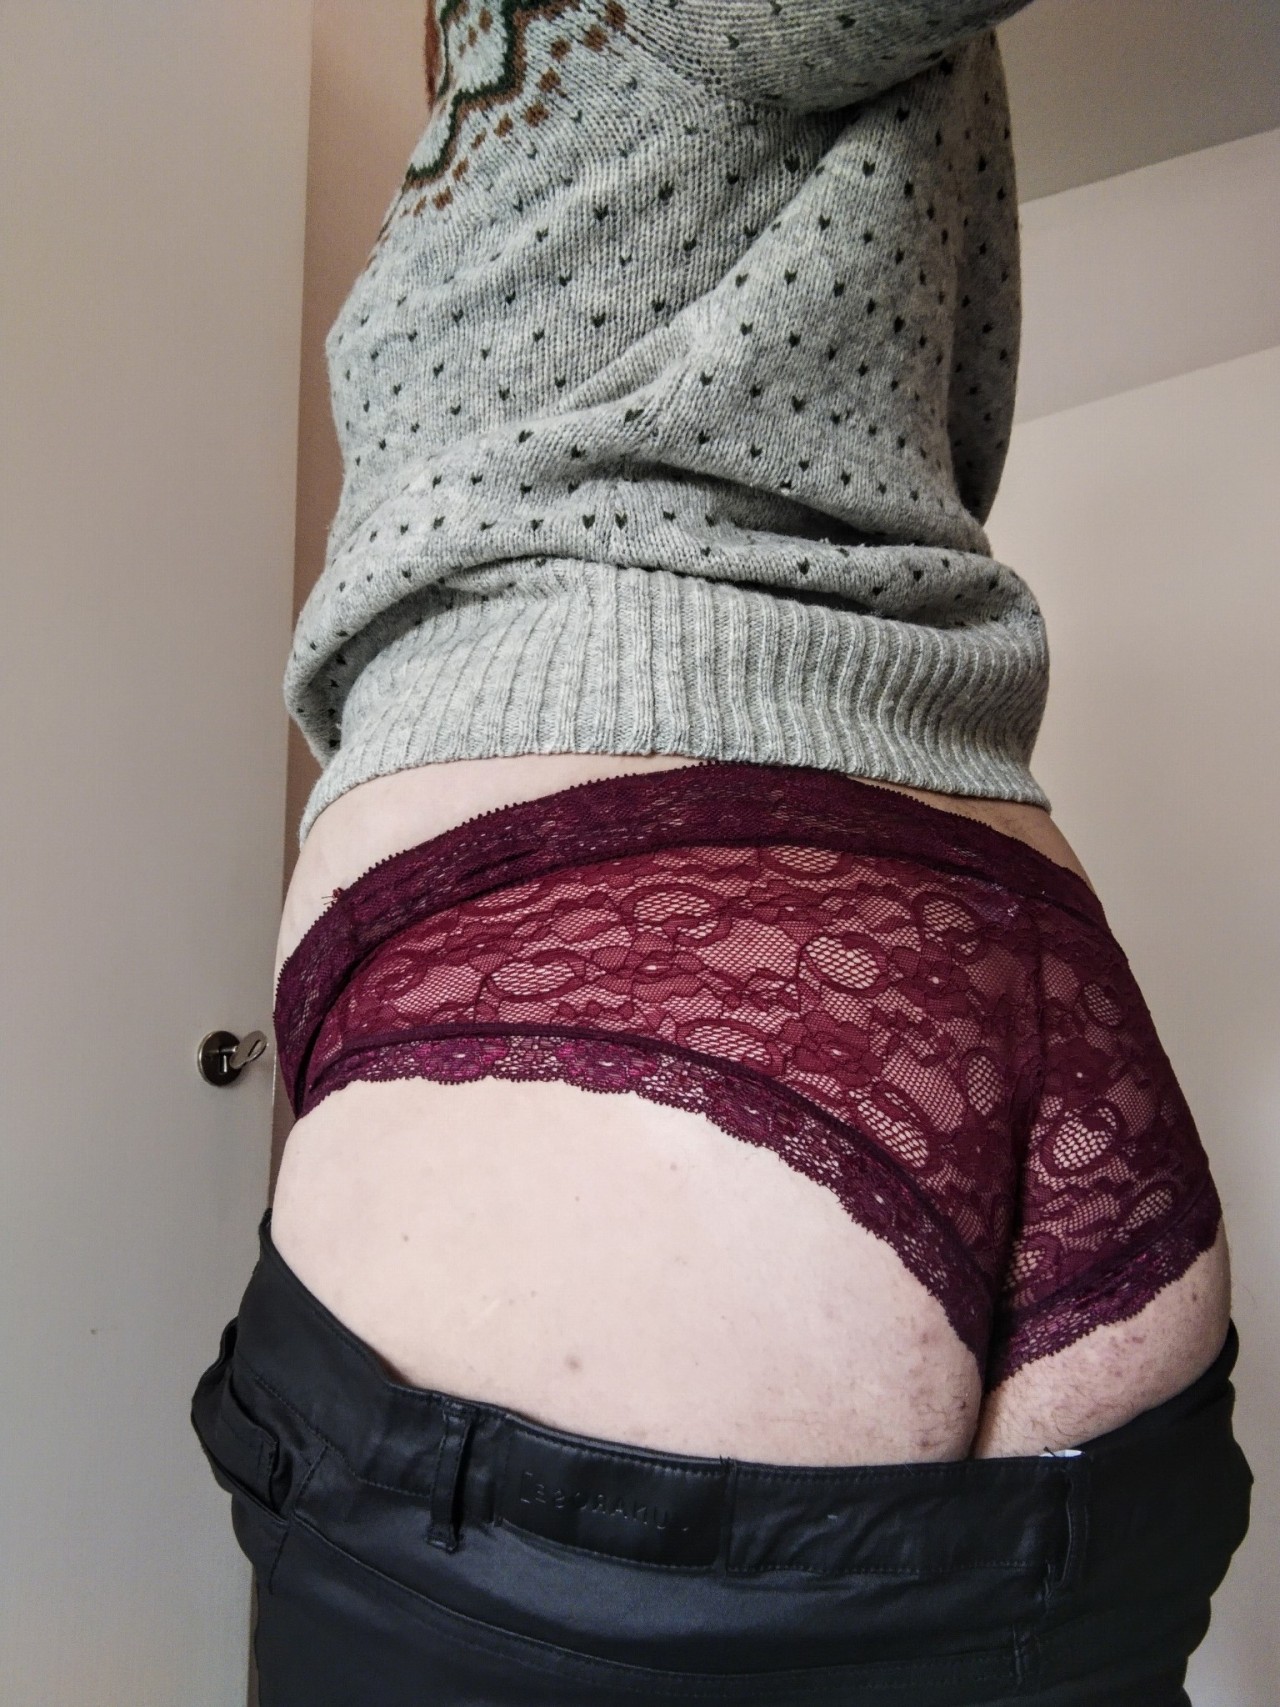 Porn For the anon(s) asking about ootd photos